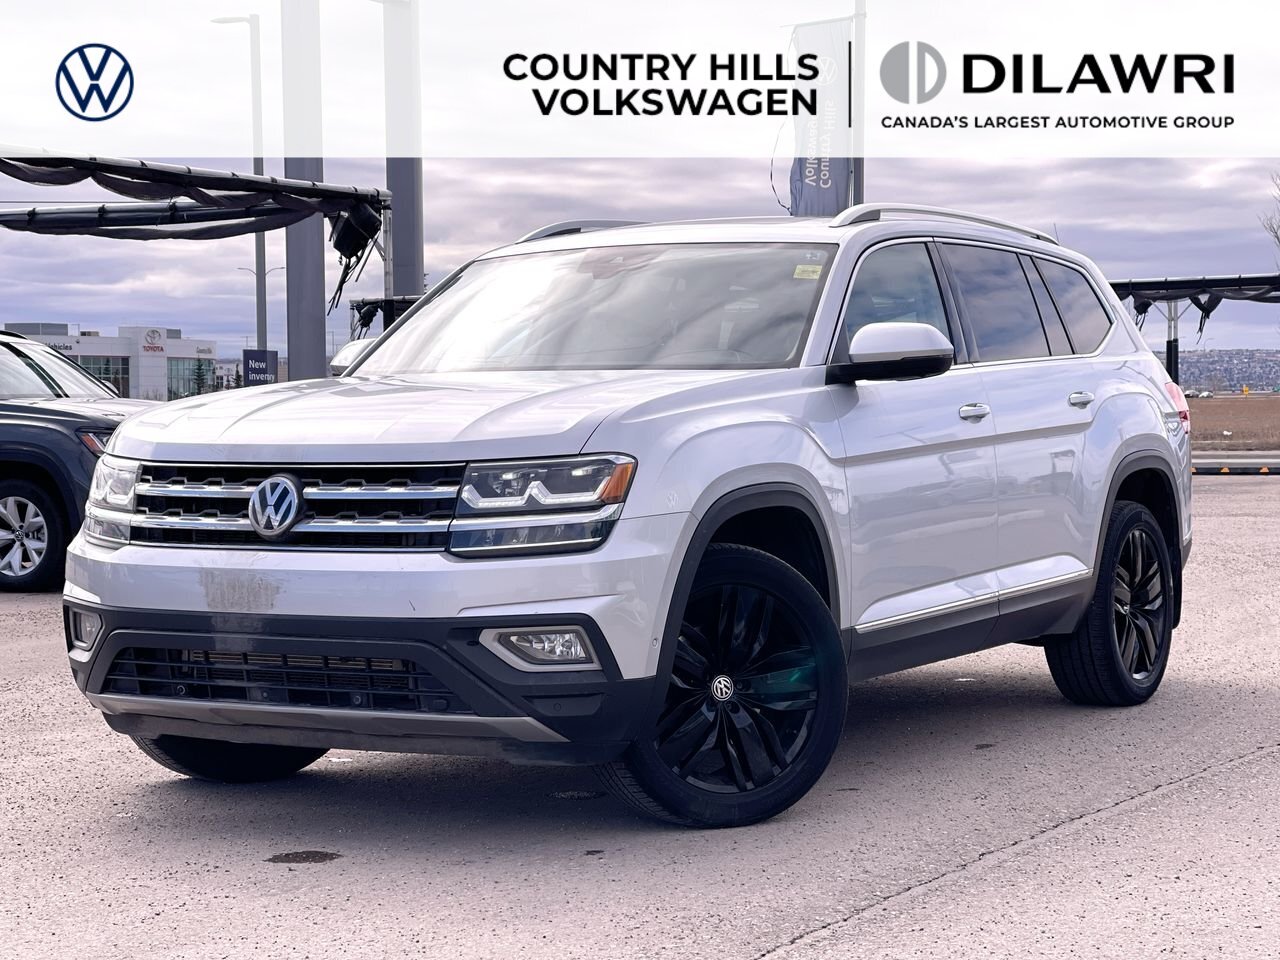 2019 Volkswagen Atlas Execline Leather AWD 3.6L V6 Locally Owned/One Own